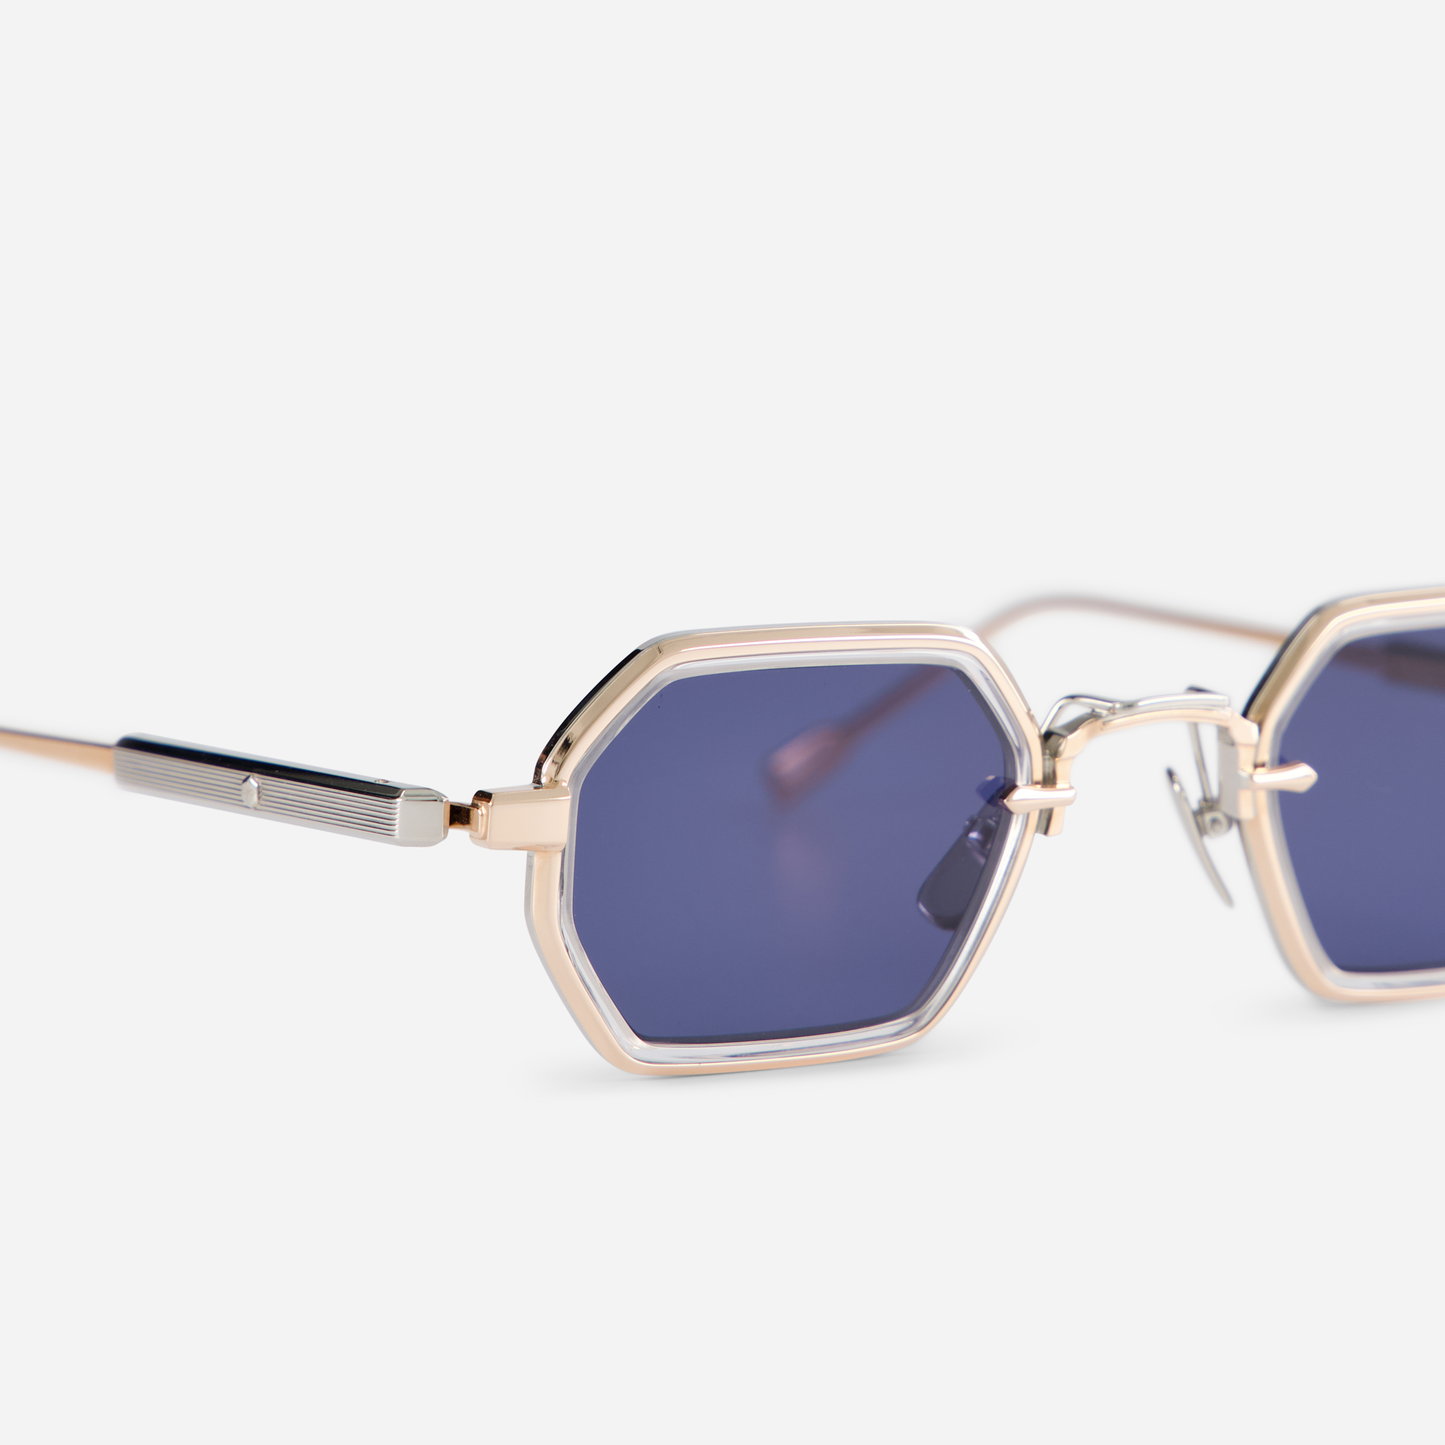 Crafted in Japan, the Hadar-T RG/P-1 showcases a titanium frame with a combination of rose gold and platinum coatings, accented by crystal takiron rim inserts. The eyewear is designed with BL-16 blue lenses for a unique look.